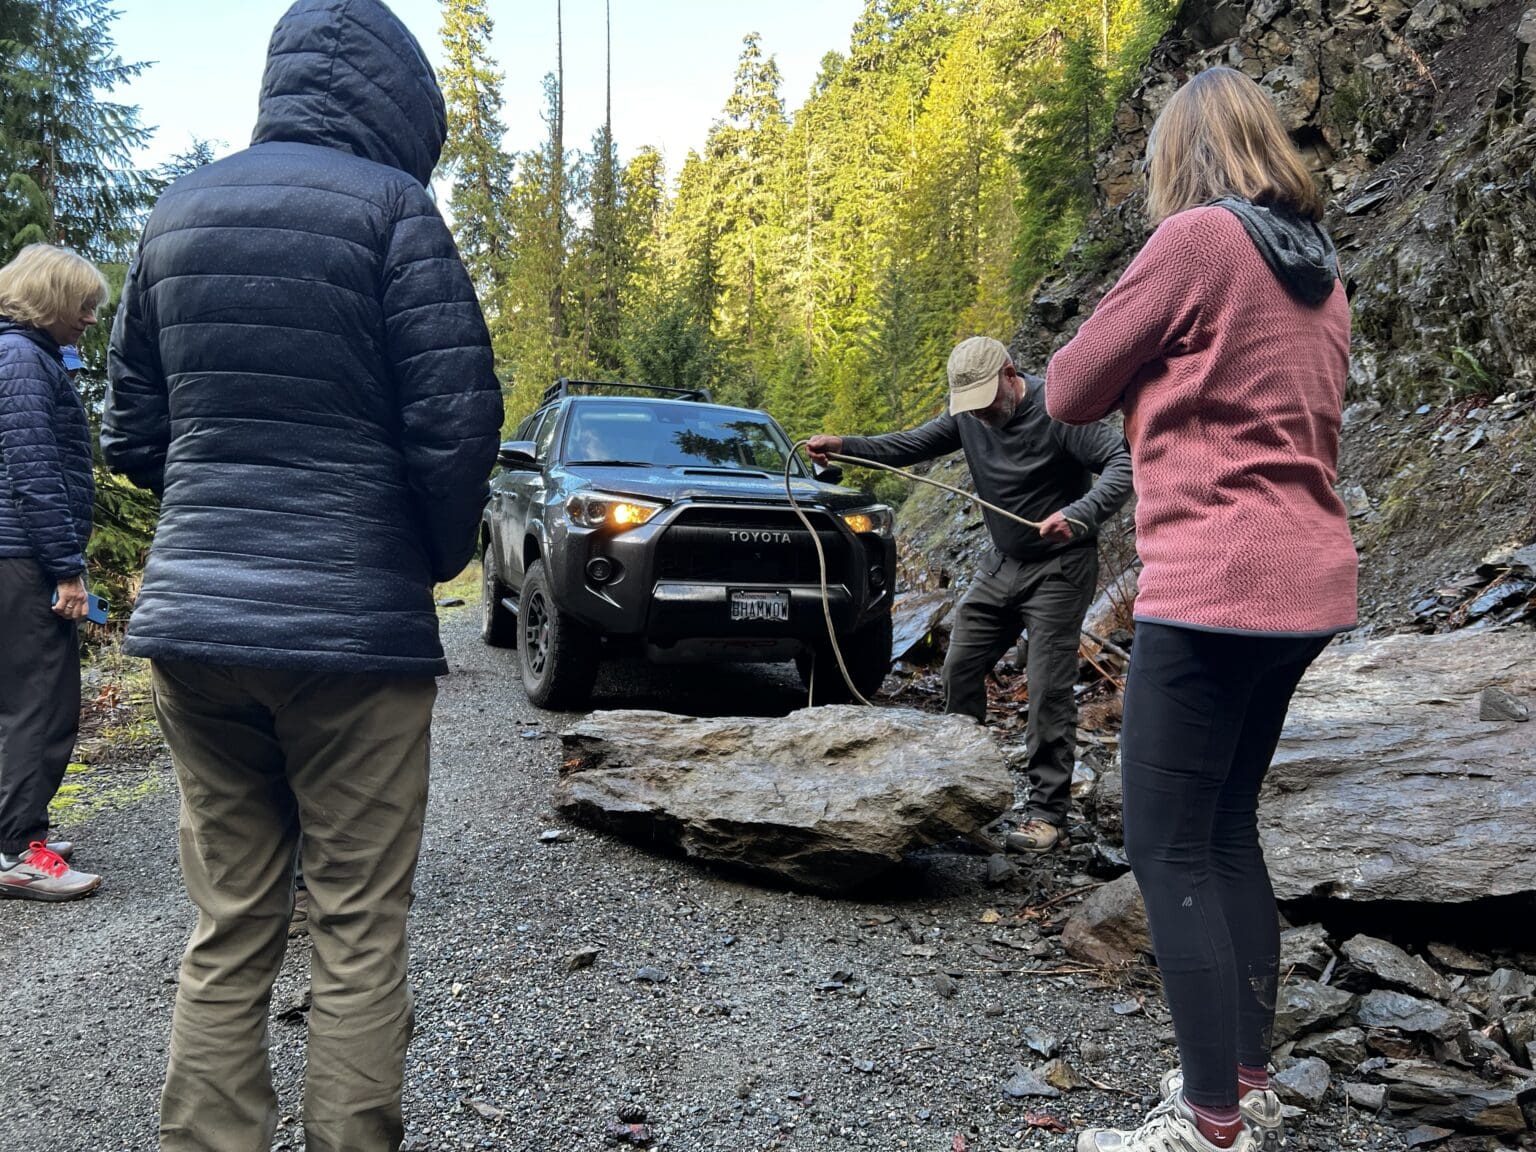 The group watches Vernon Brown of Bellingham fasten a rope to a fallen rock to the hood of the car.